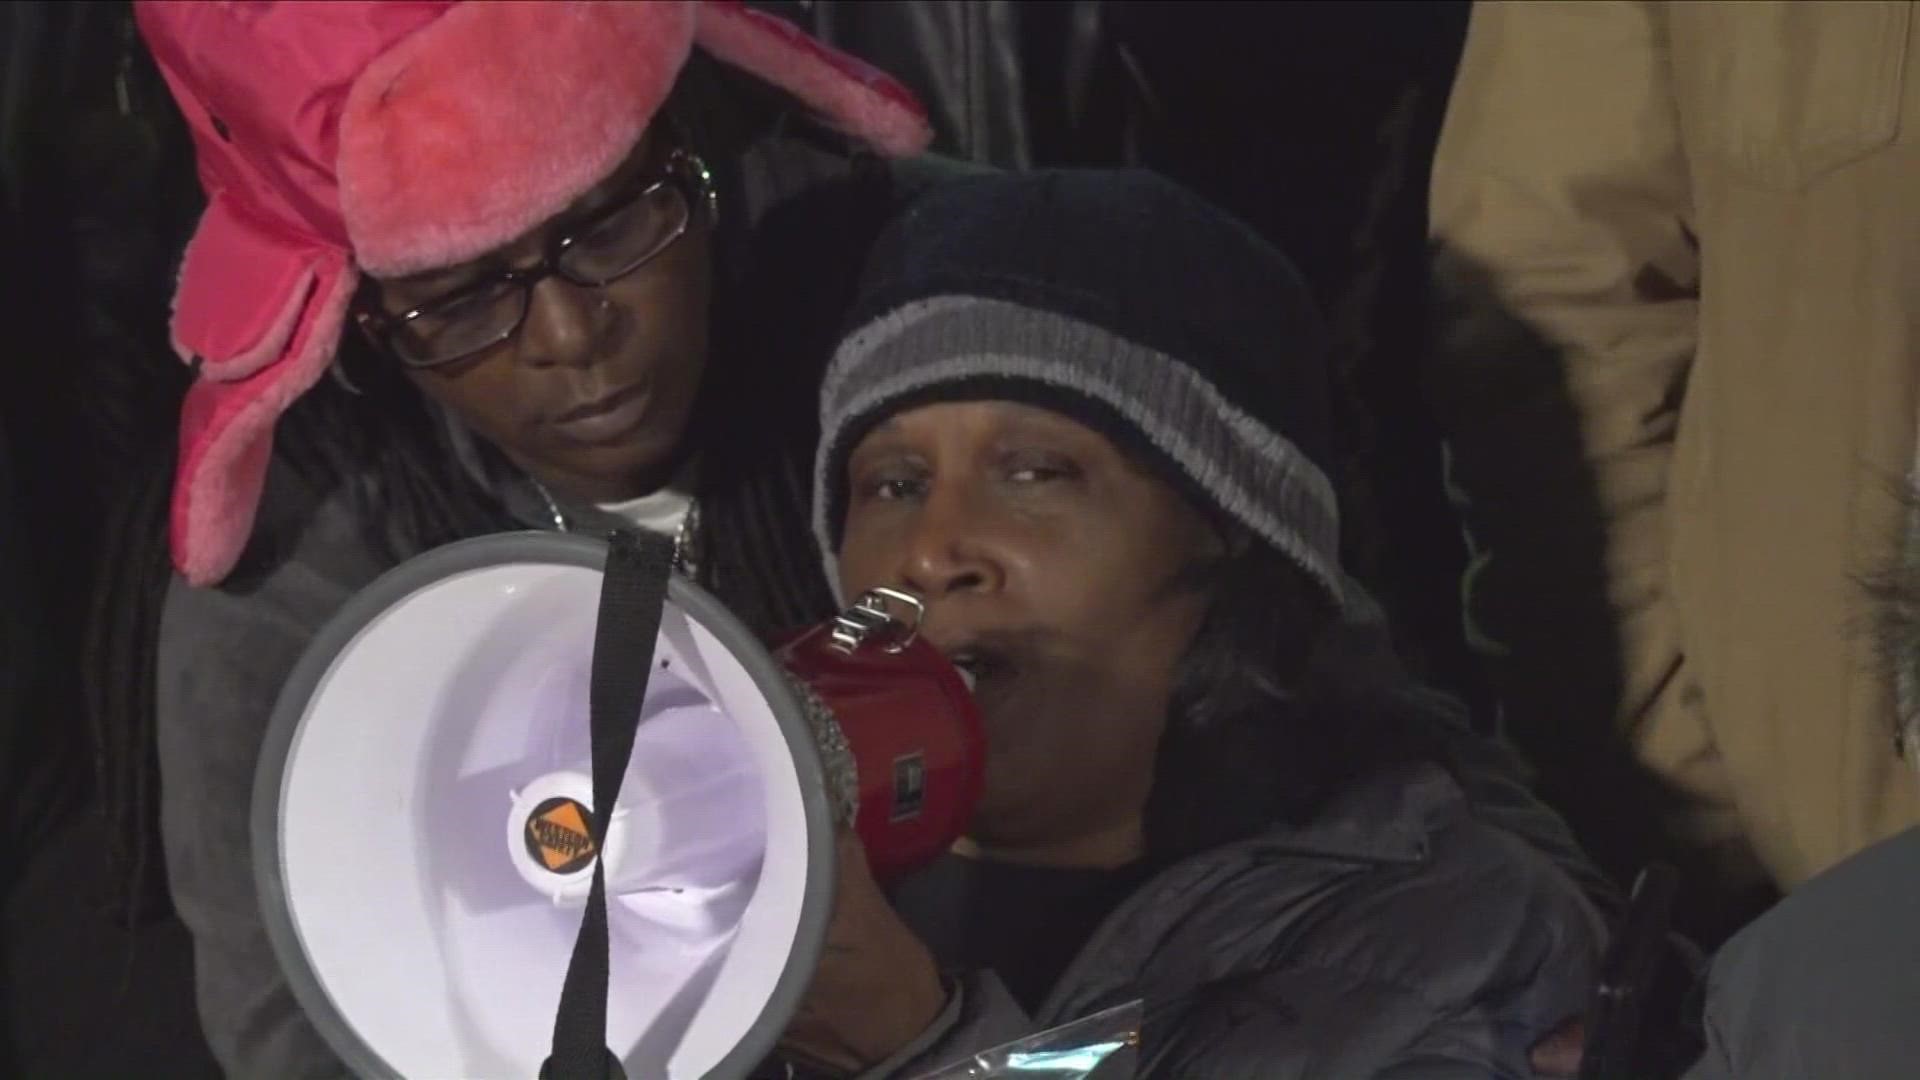 Tyre Nichols' mother remembers her son, calls for peaceful protests during candlelight vigil